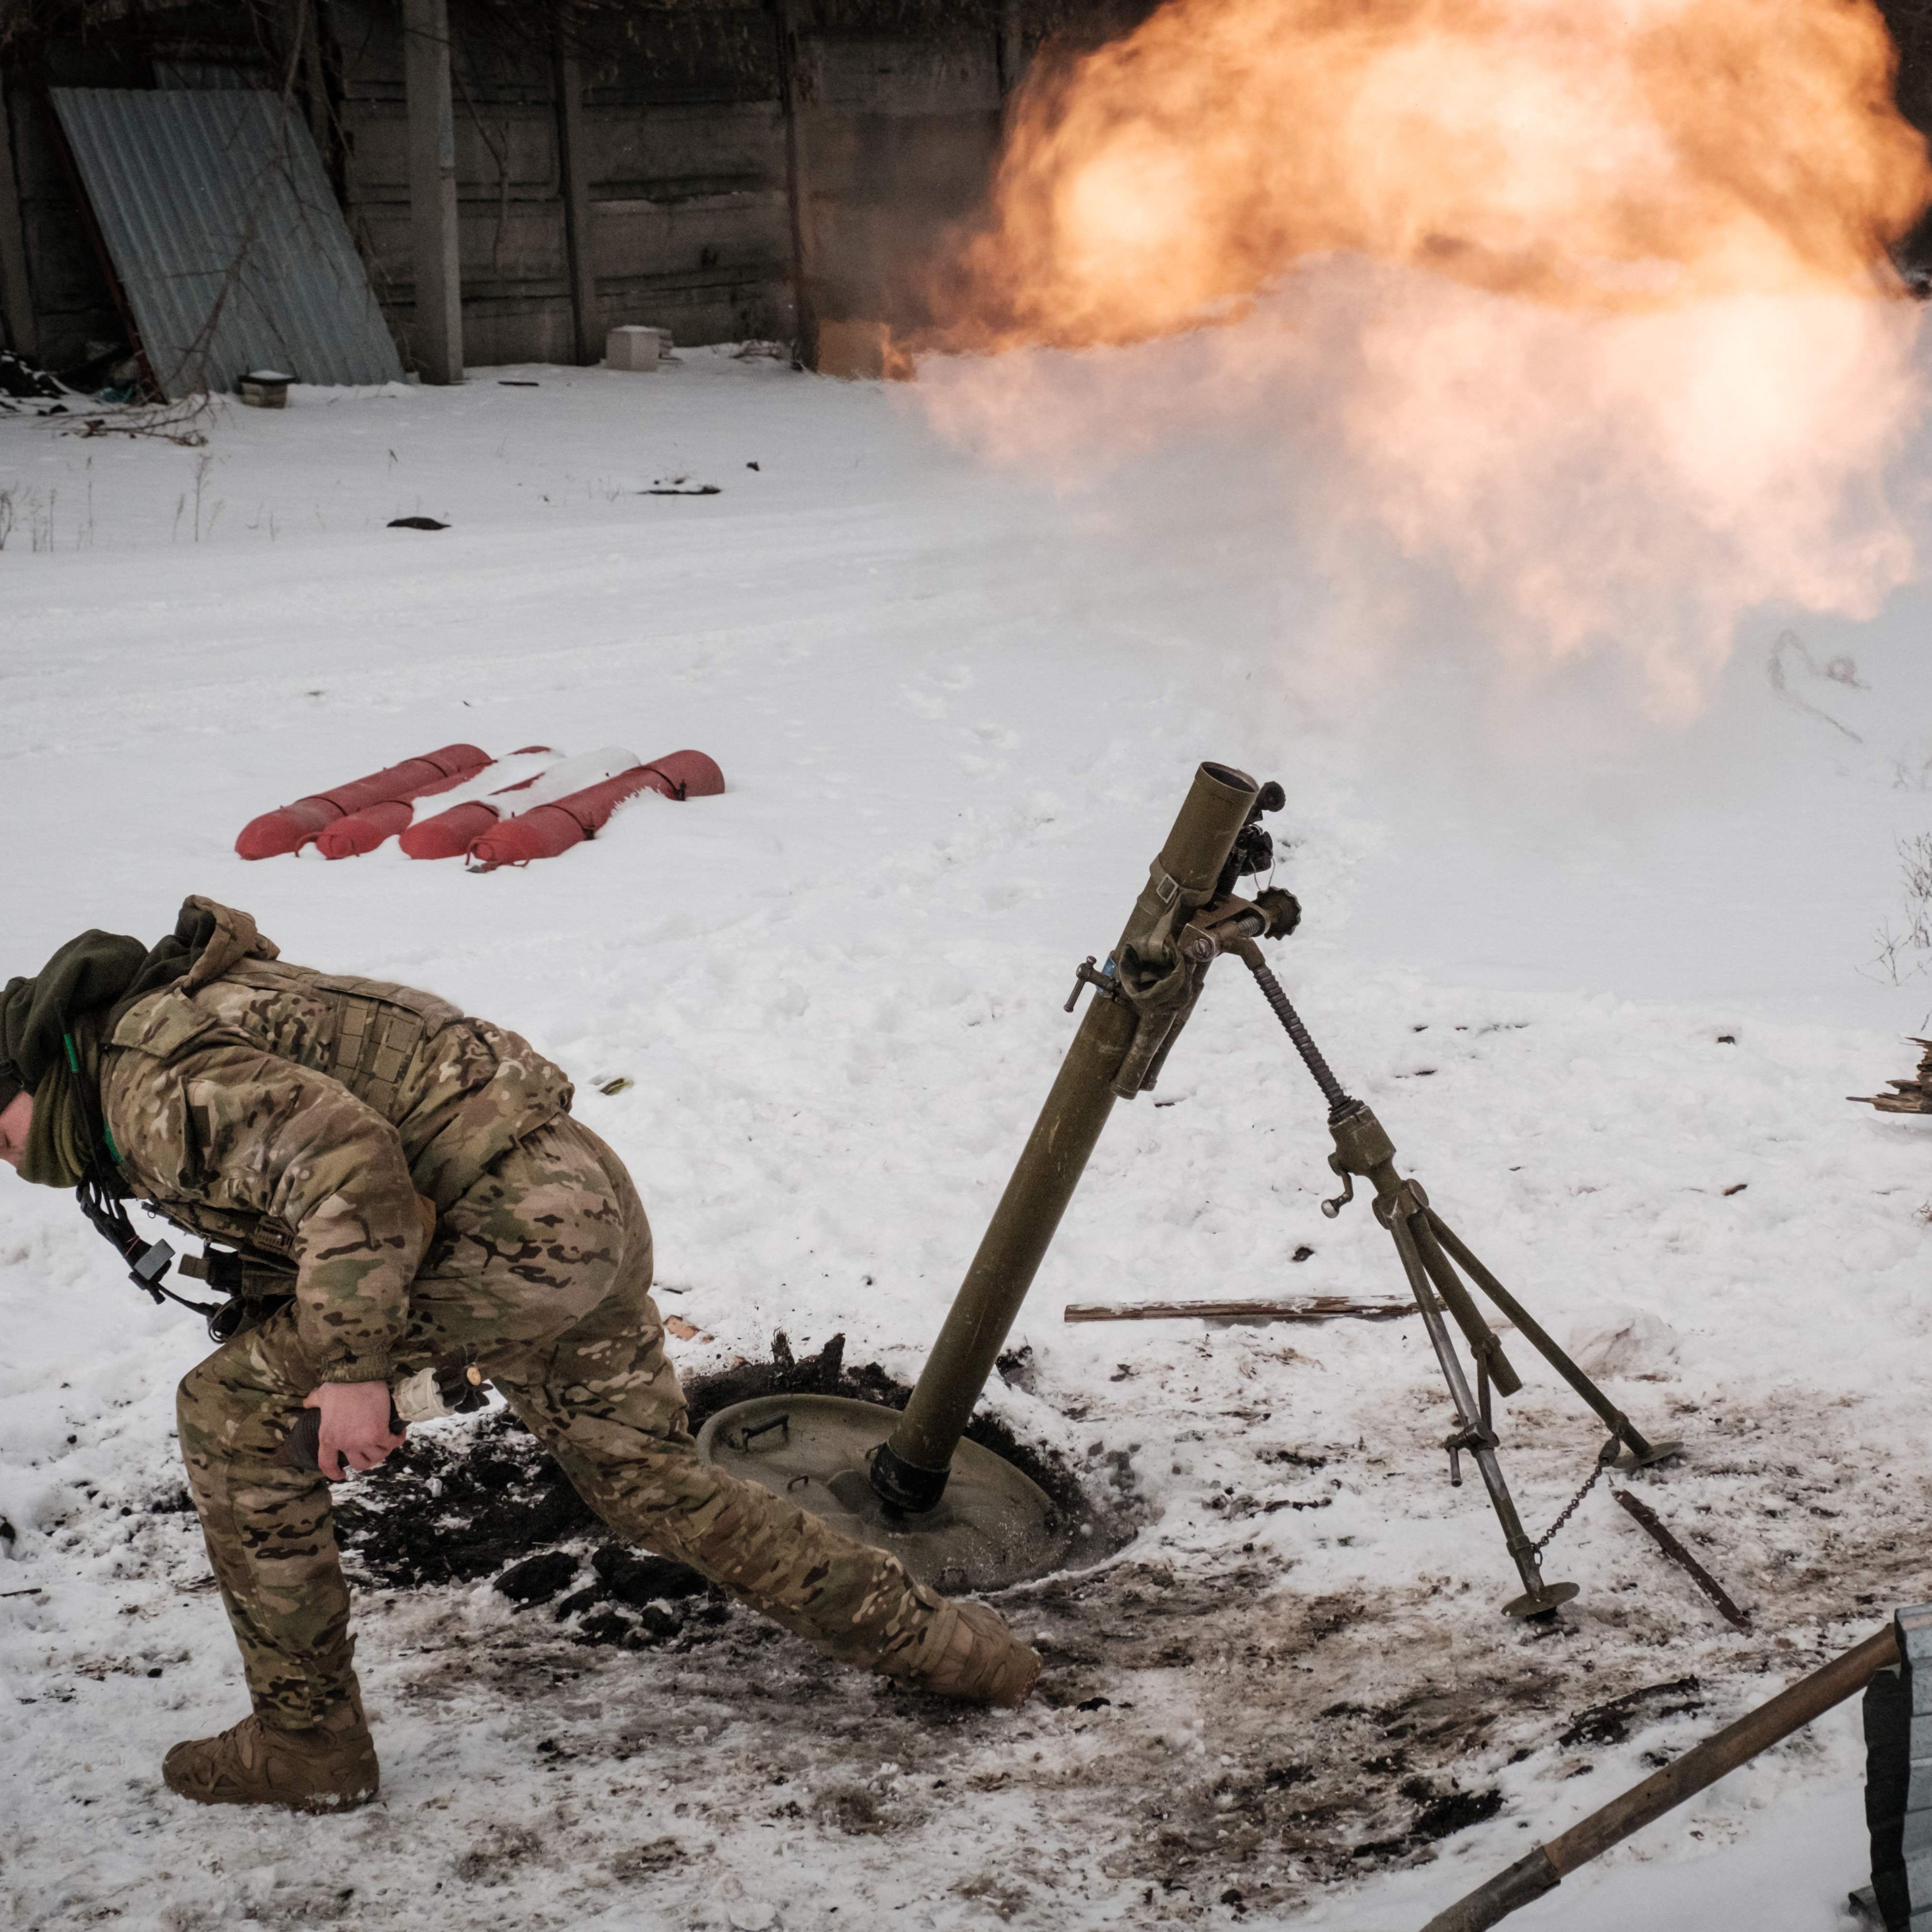 February 16, 2023: A Ukrainian serviceman of the State Border Guard Service fires a mortar toward the Russian position in Bakhmut as the head of Russia's mercenary outfit Wagner said it could take months to capture the embattled Ukraine city and slammed Moscow's "monstrous bureaucracy" for slowing military gains. - Russia has been trying to encircle the battered industrial city and wrest it ahead of Feb. 24, the first anniversary of what it terms its "special military operation" in Ukraine.